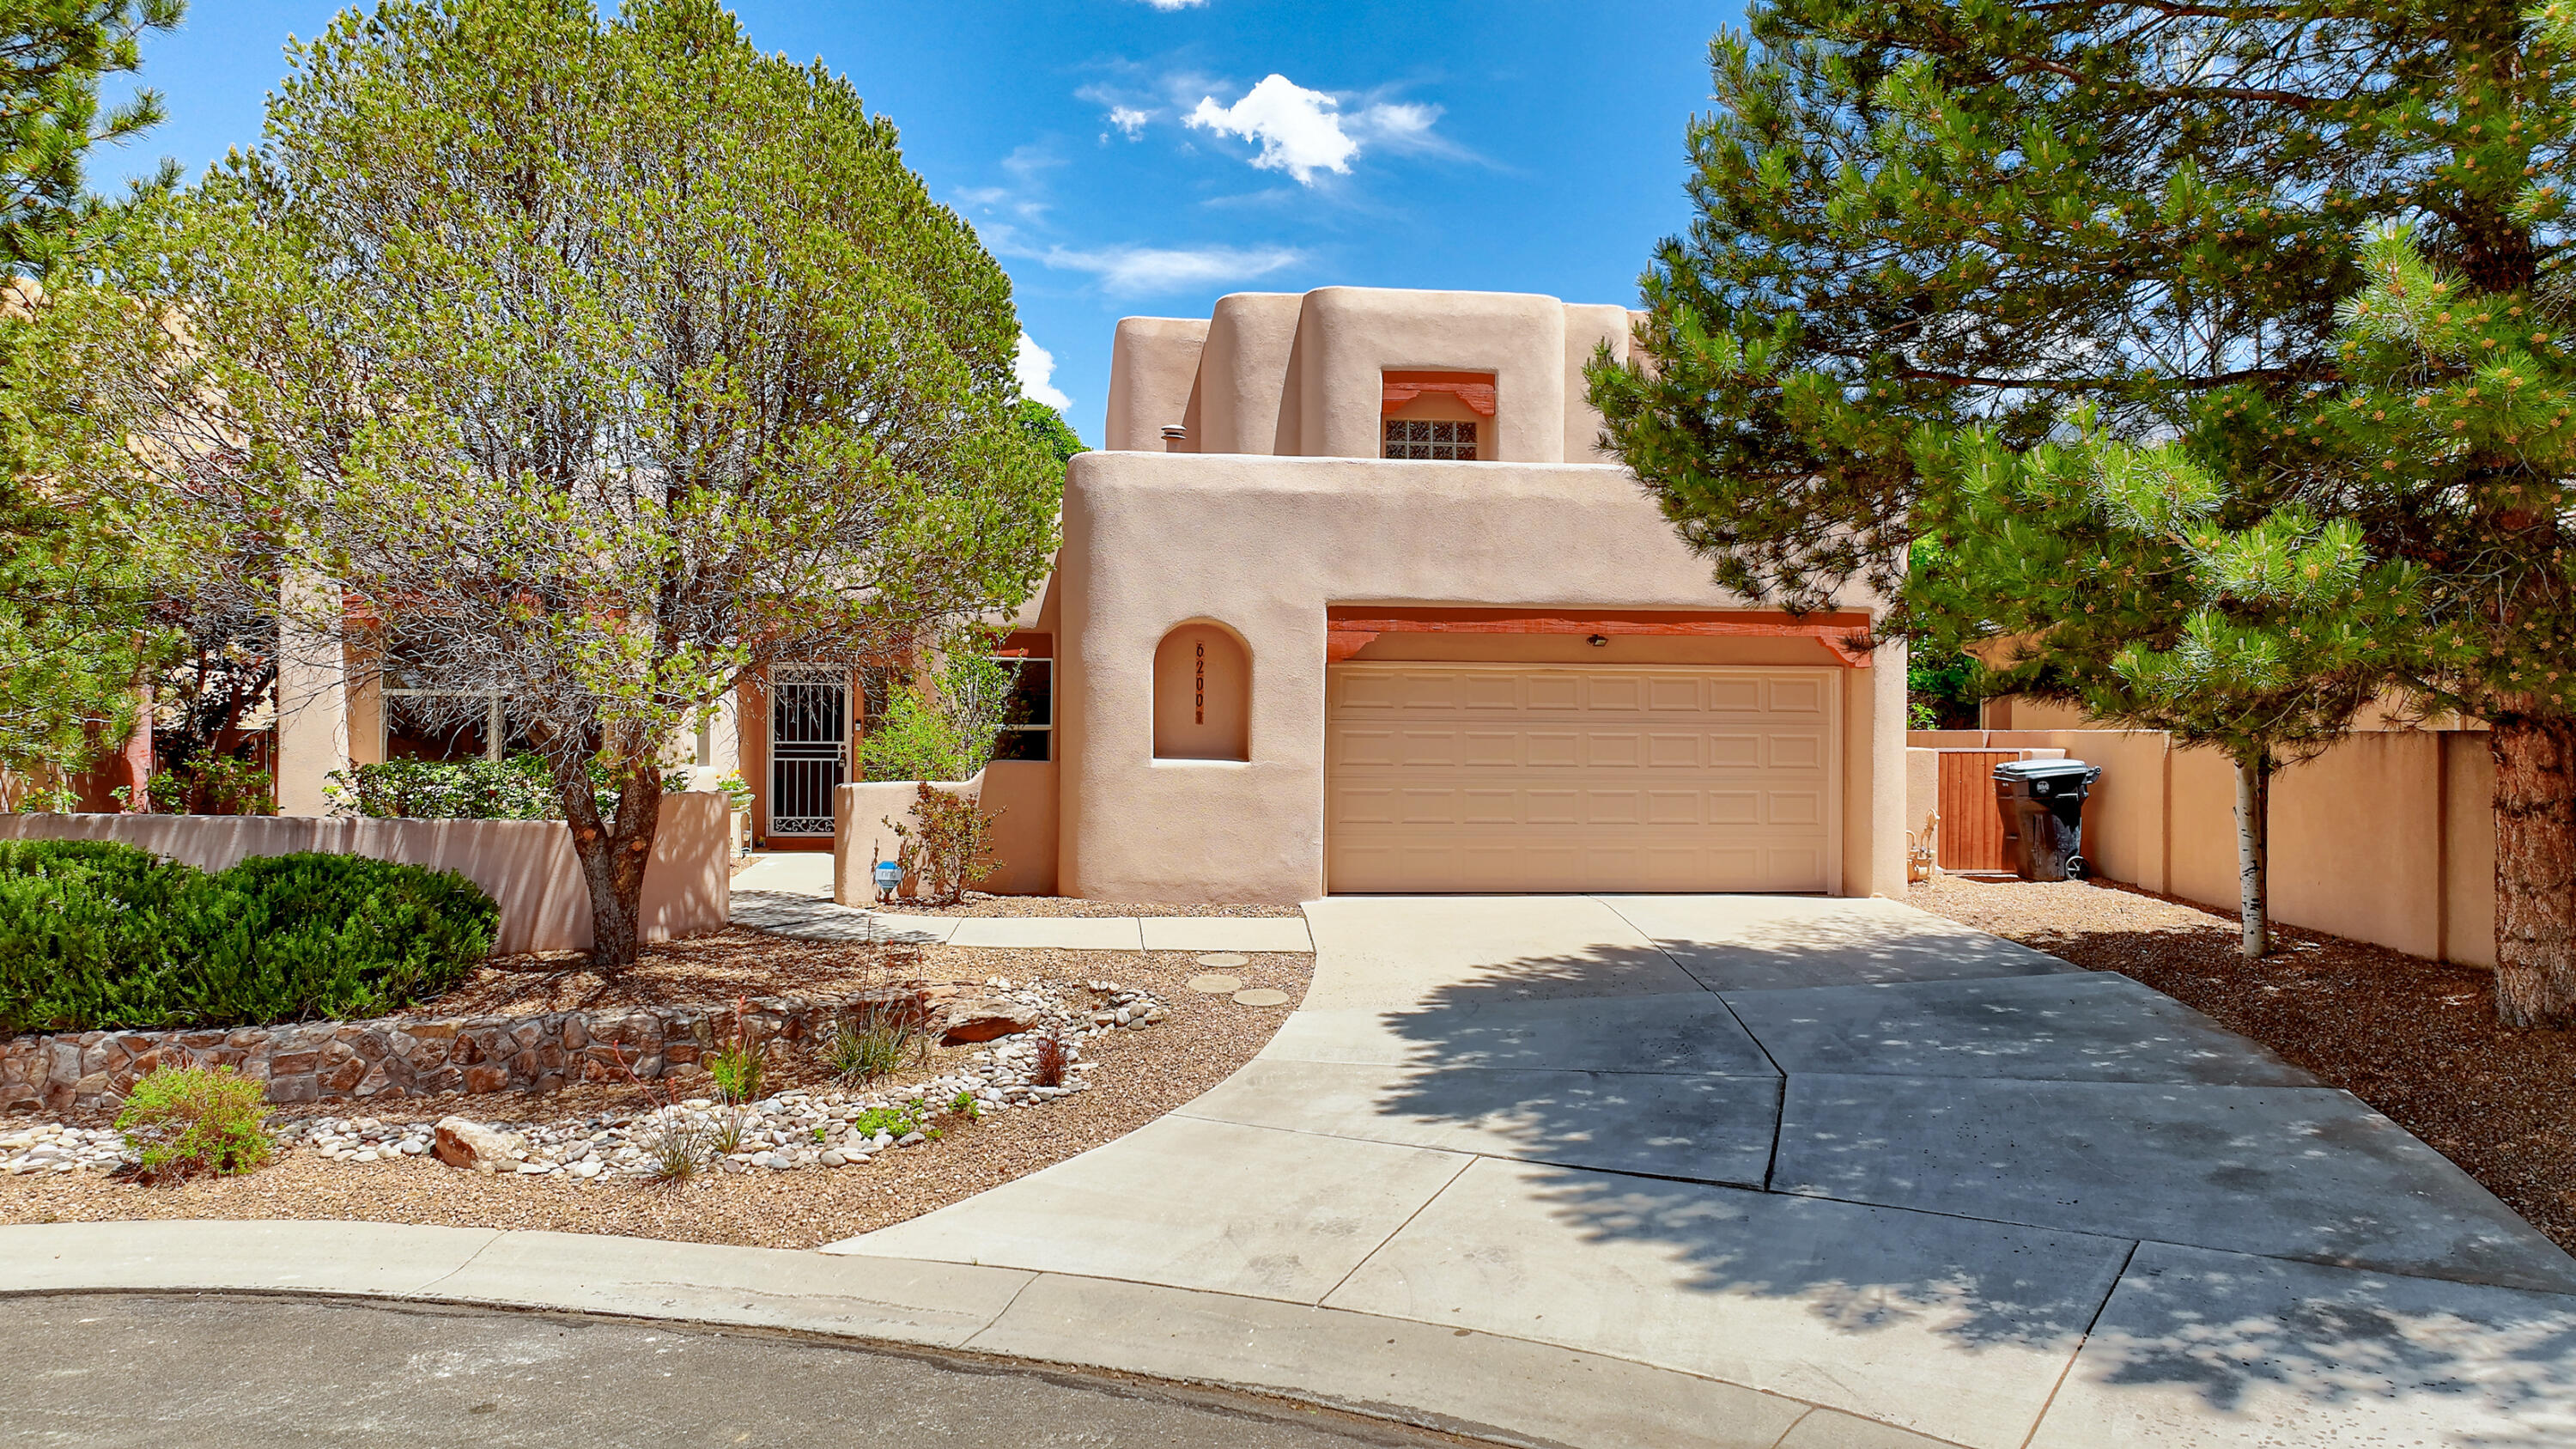 Welcome to this captivating, Santa Fe style custom home in High Desert on a private culdesac lot w/ views. Designer color scheme, beautiful finishes & a park like back yard.Updated chef's kitchen with breakfast bar, nook & SS appliances. Private Primary suite features hardwood floors, corner Kiva gaslog fireplace & covered deck w/swing & some of the best mountain views in High Desert. The interior features no carpet, custom ceramic tile, porcelain travertine & tumbled marble finishes, dramatic living/dining room raised wood beam T & G ceiling w/east wall of windows for light & more views. Potential fourth bedroom/Den/Media room, currently being used as an office.Enjoy Tranquil outdoor living from the front courtyard filled w/roses, the private backyard w/covered & open patio areas